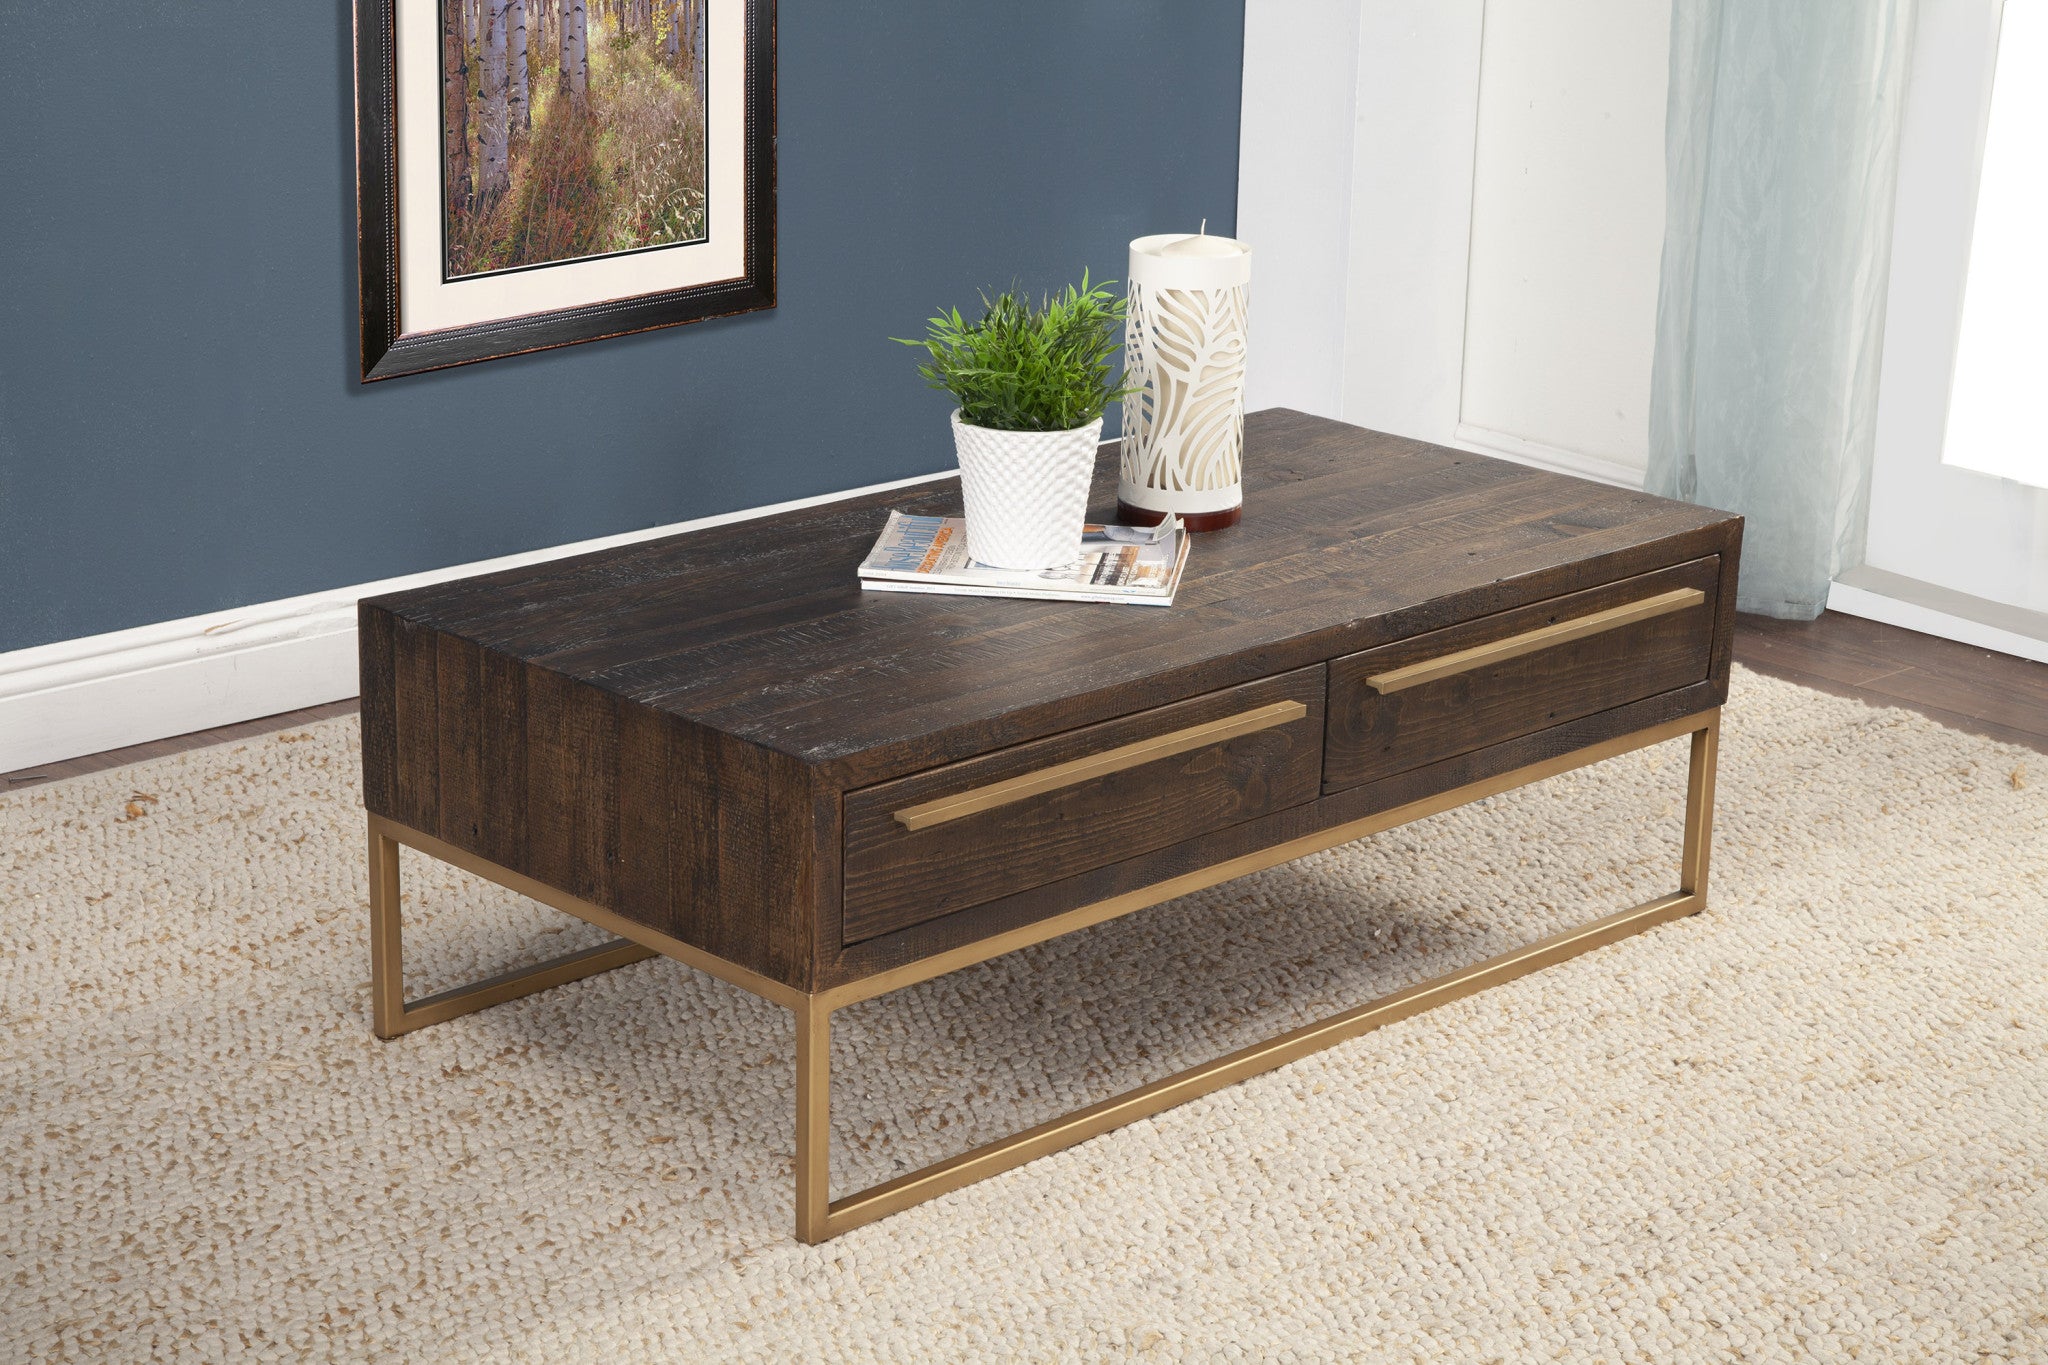 47" Dark Brown And Gold Metal Coffee Table With Drawer